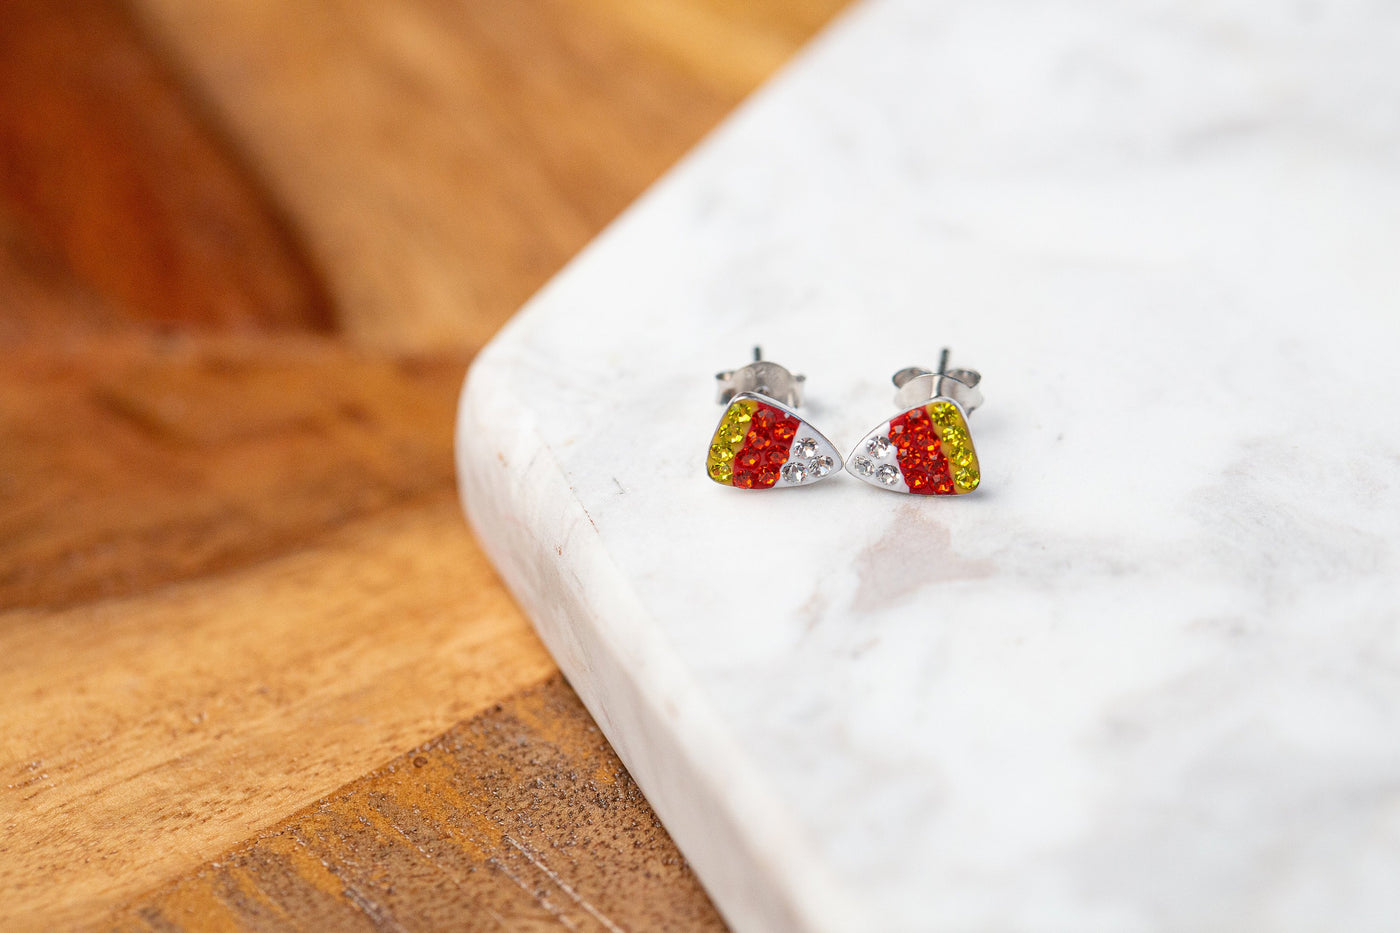 Candy Corn Crystal Stud Earrings | Annie and Sisters | sister stud earrings, for kids, children's jewelry, kid's jewelry, best friend